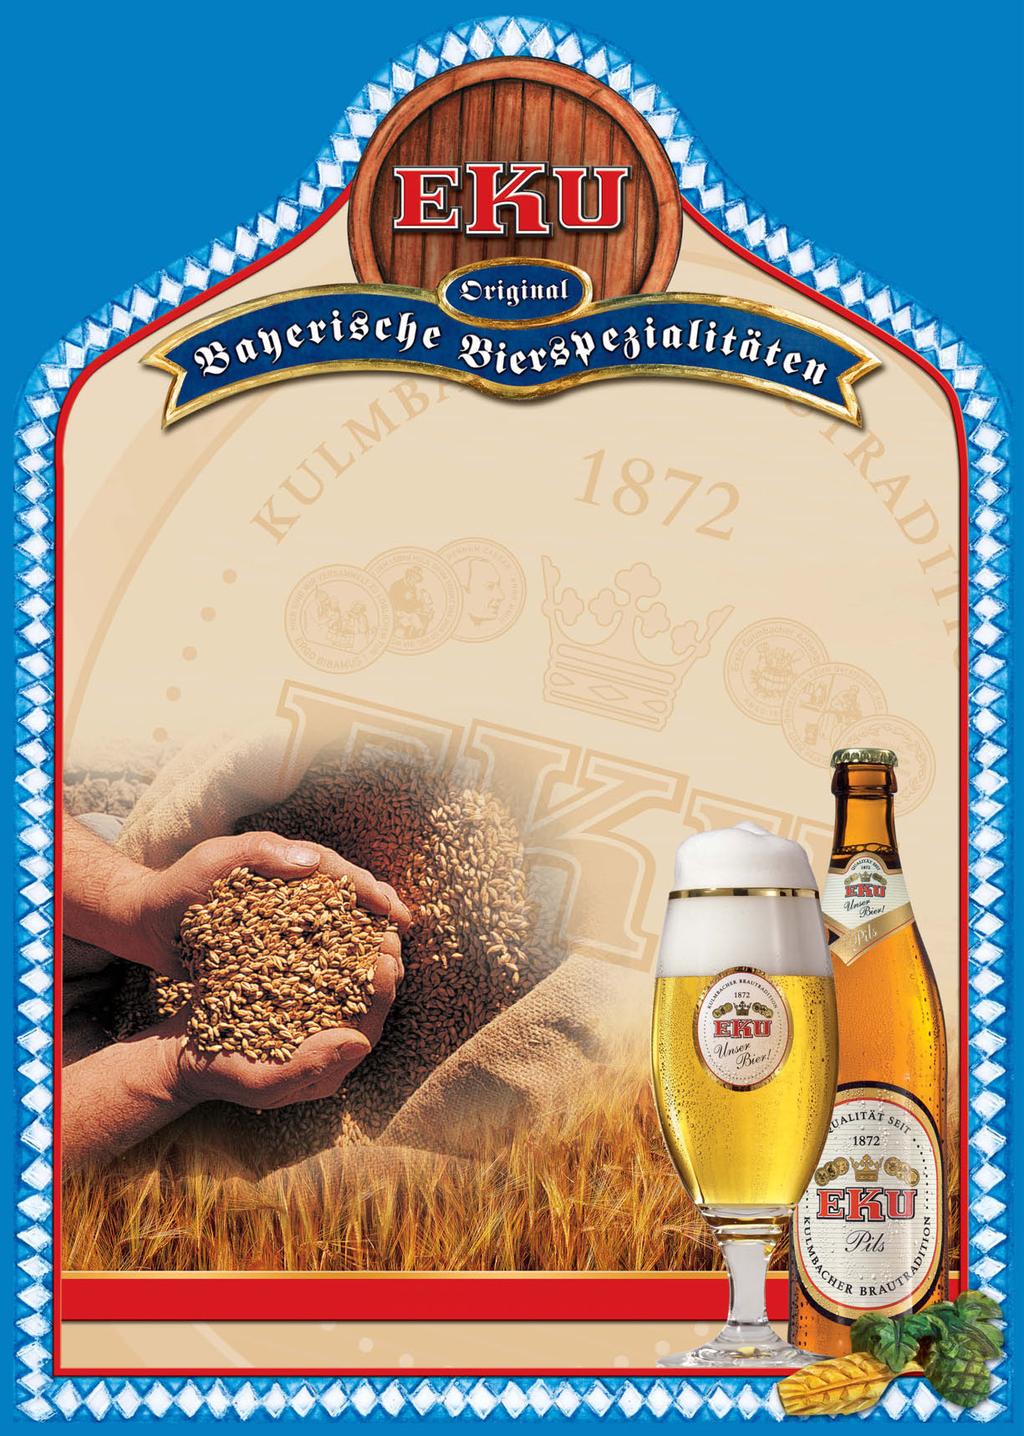 EKU Pils and its Origin Brewed in the pilsner style, the Pils type of beer was invented only 150 years ago.